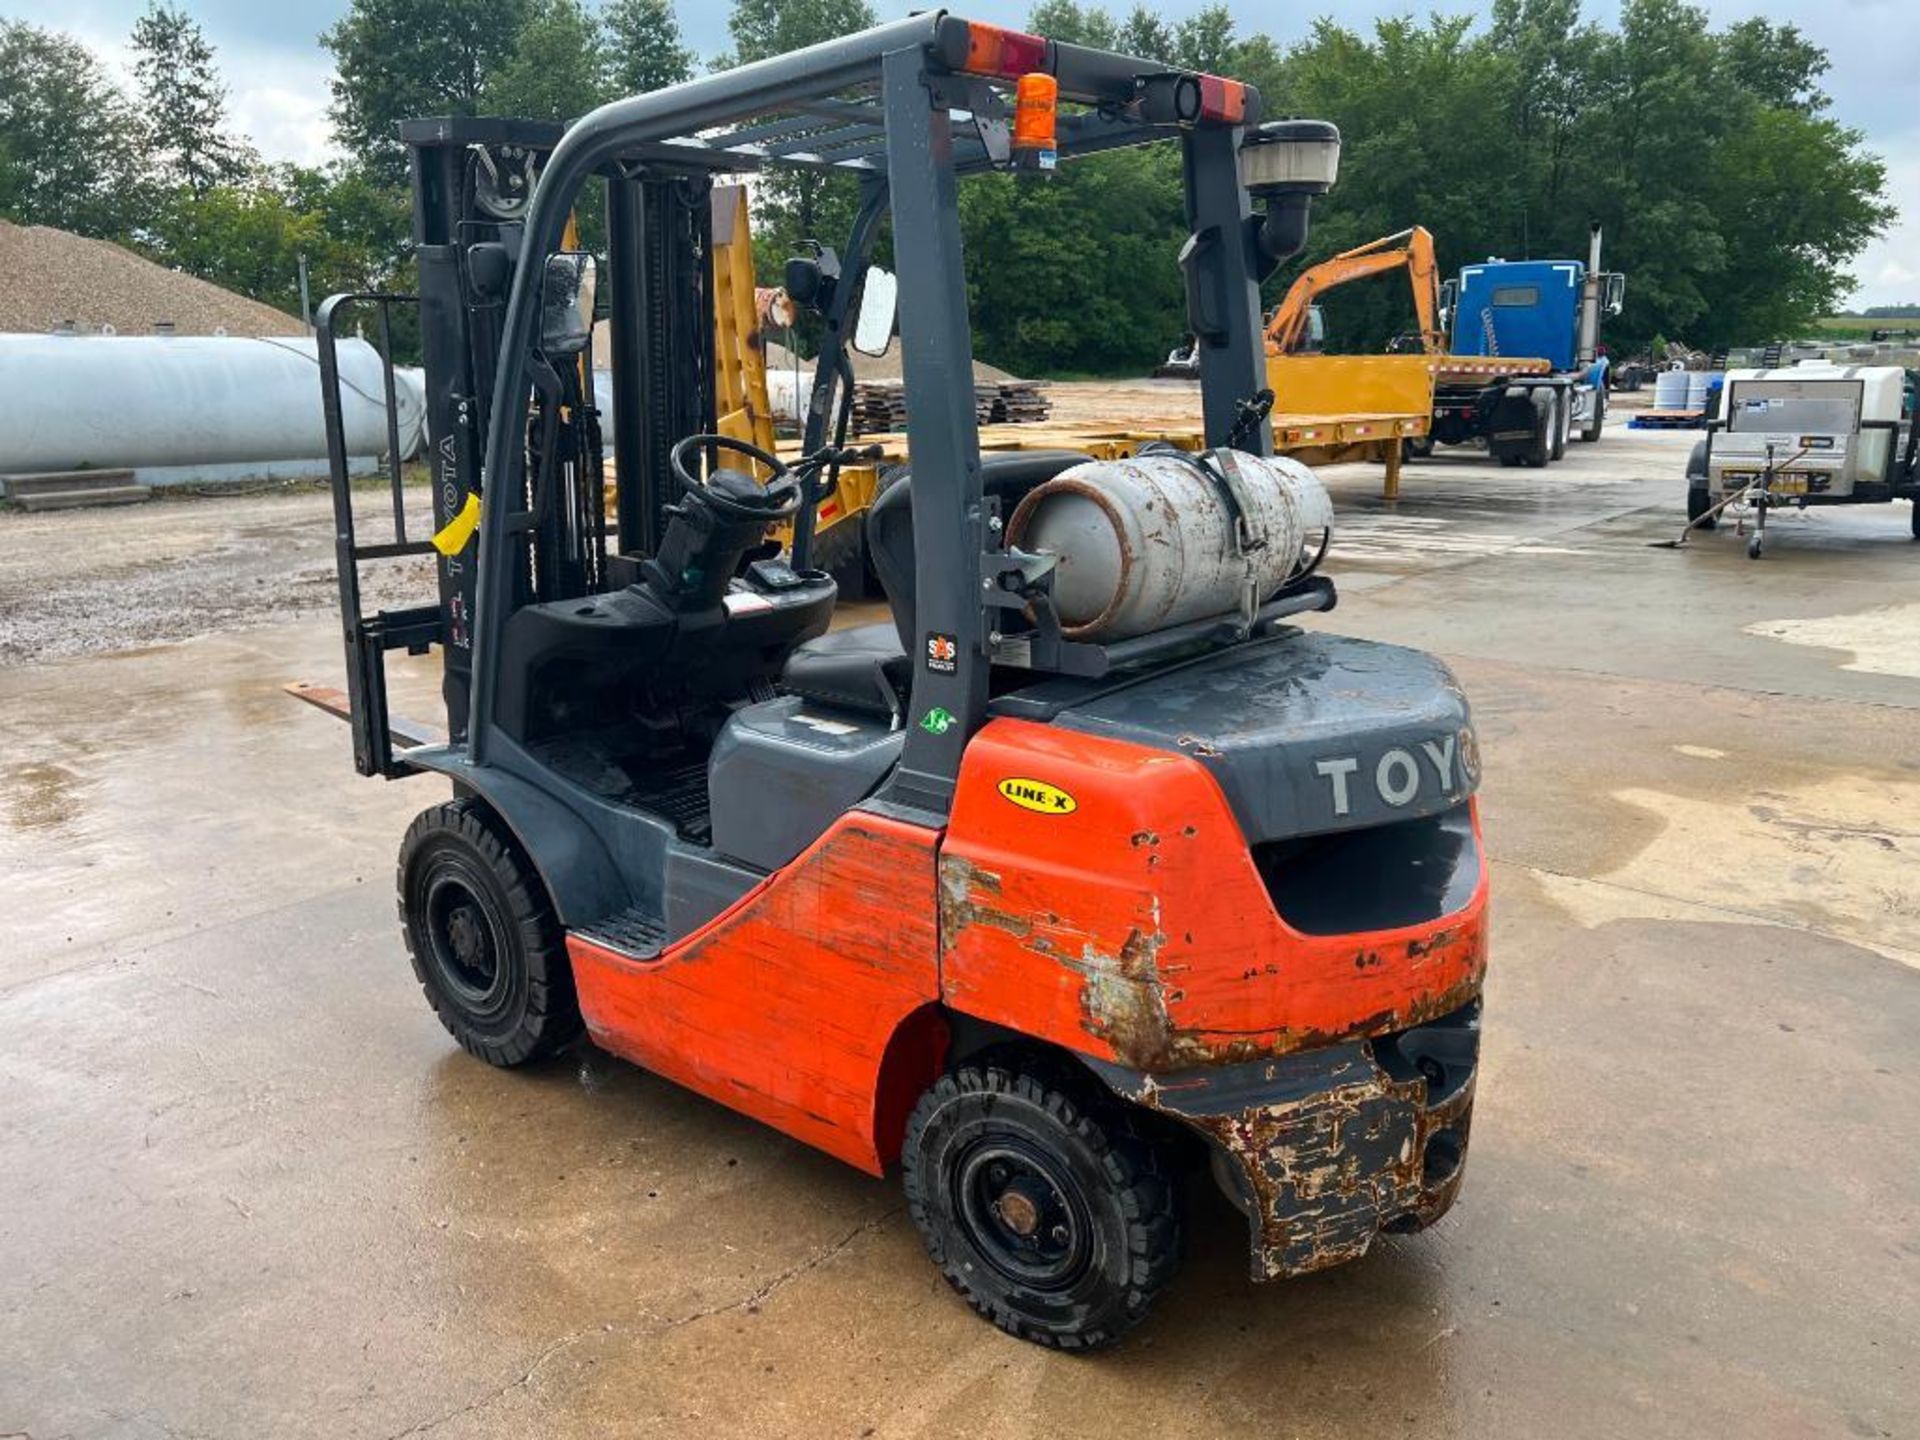 Toyota Forklift Truck, Model 8FGU25, Hours 5,264, LP. Located in Altamont, IL - Image 6 of 19